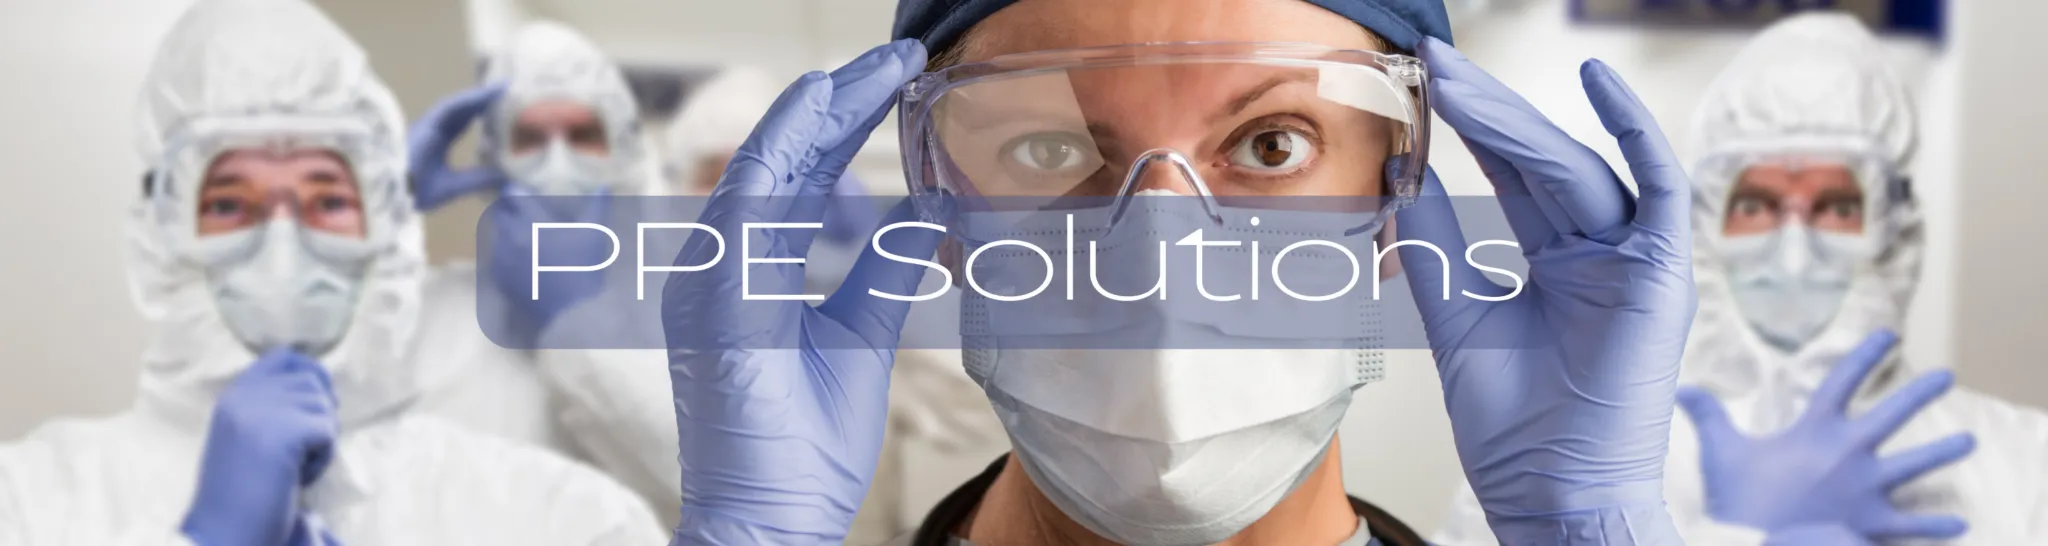 PPE-Solutions-Banner-2048x546